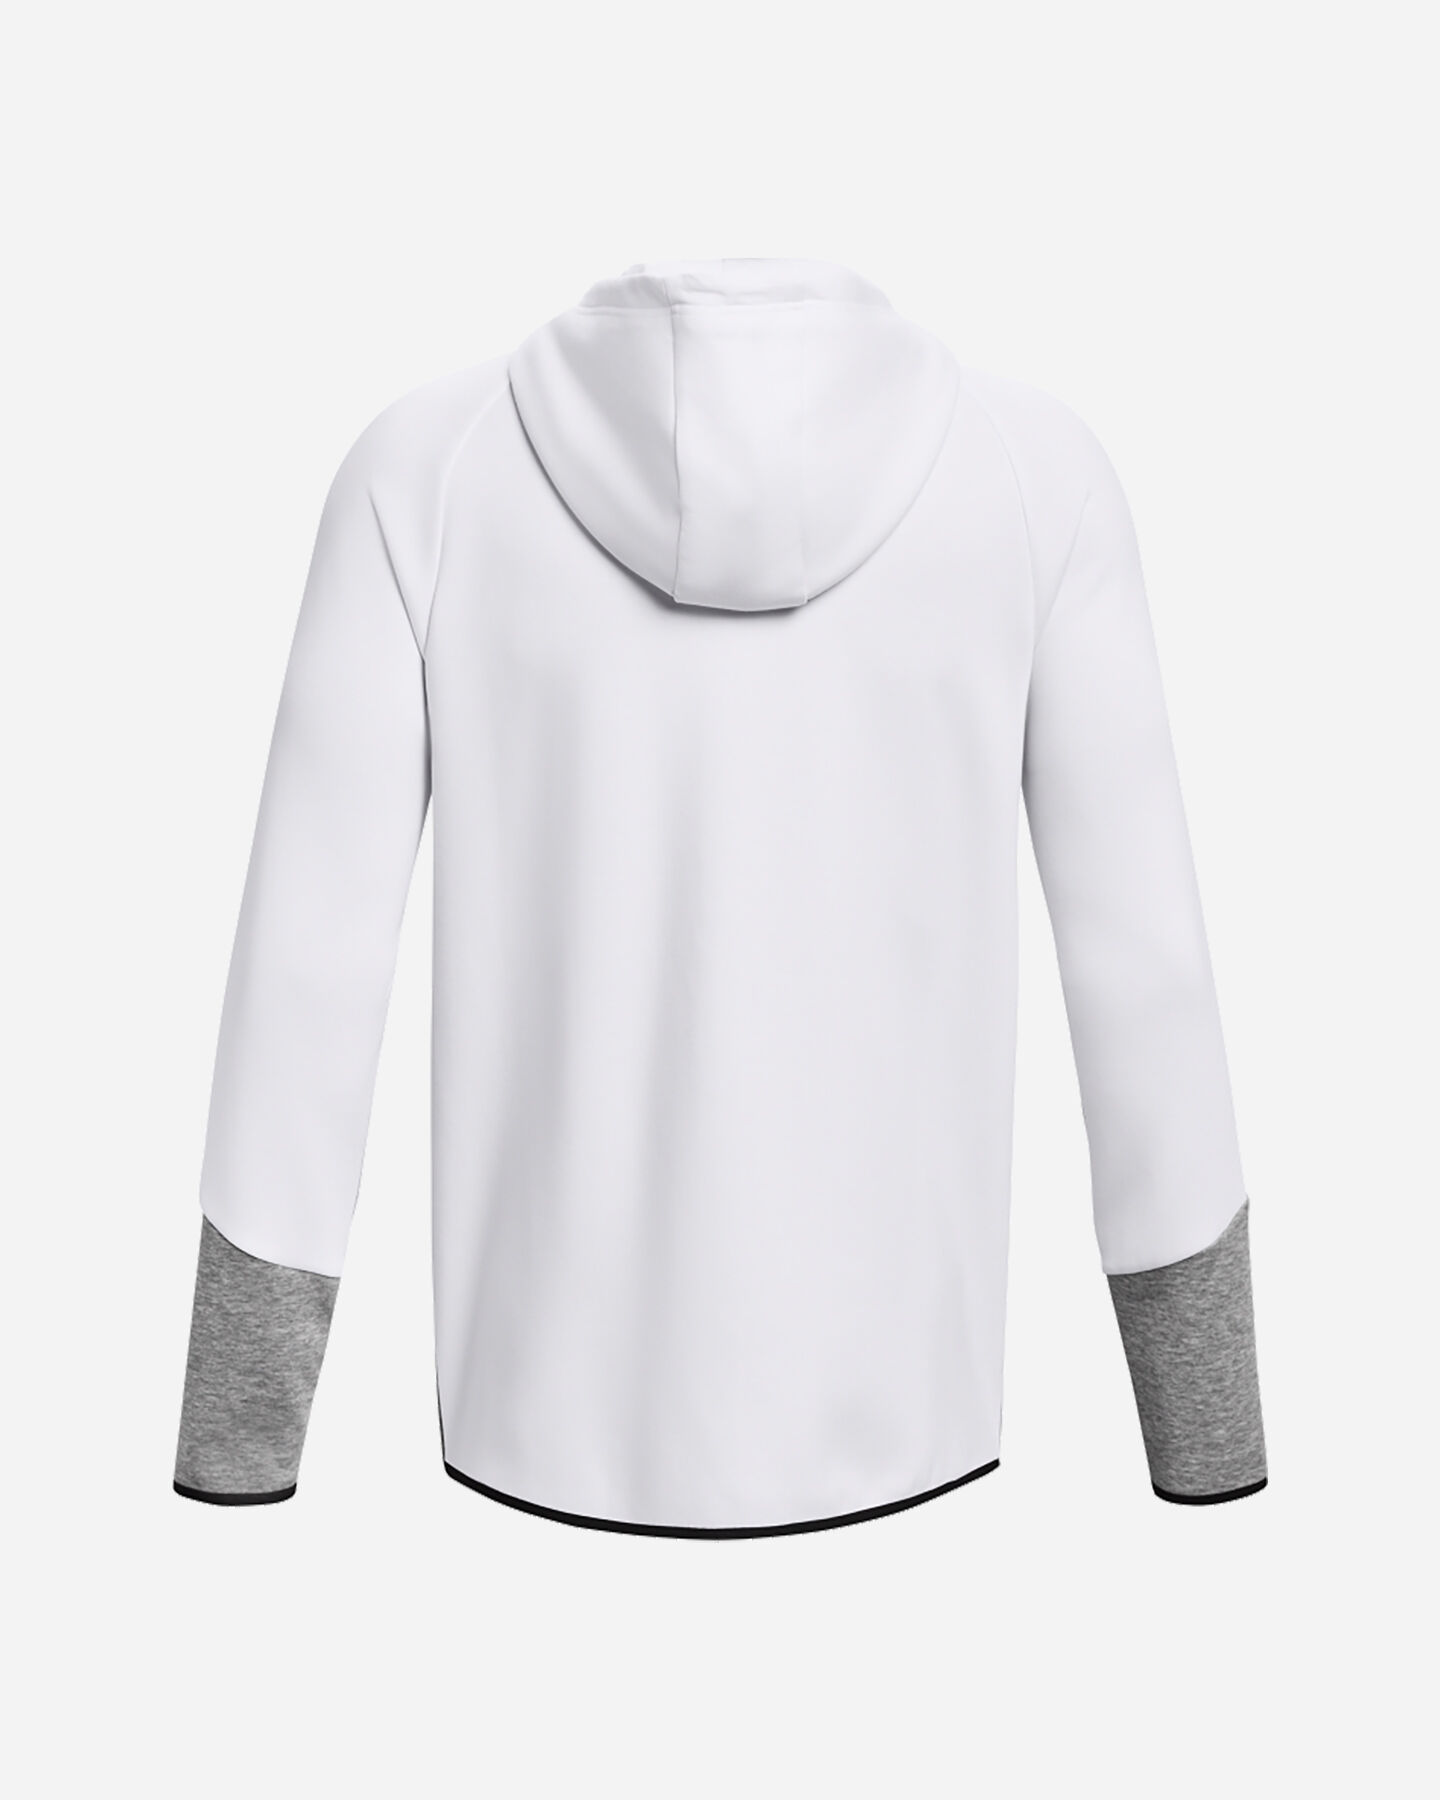  Felpa UNDER ARMOUR UNSTOPPABLEKNIT M S5579651|0012|MD scatto 1